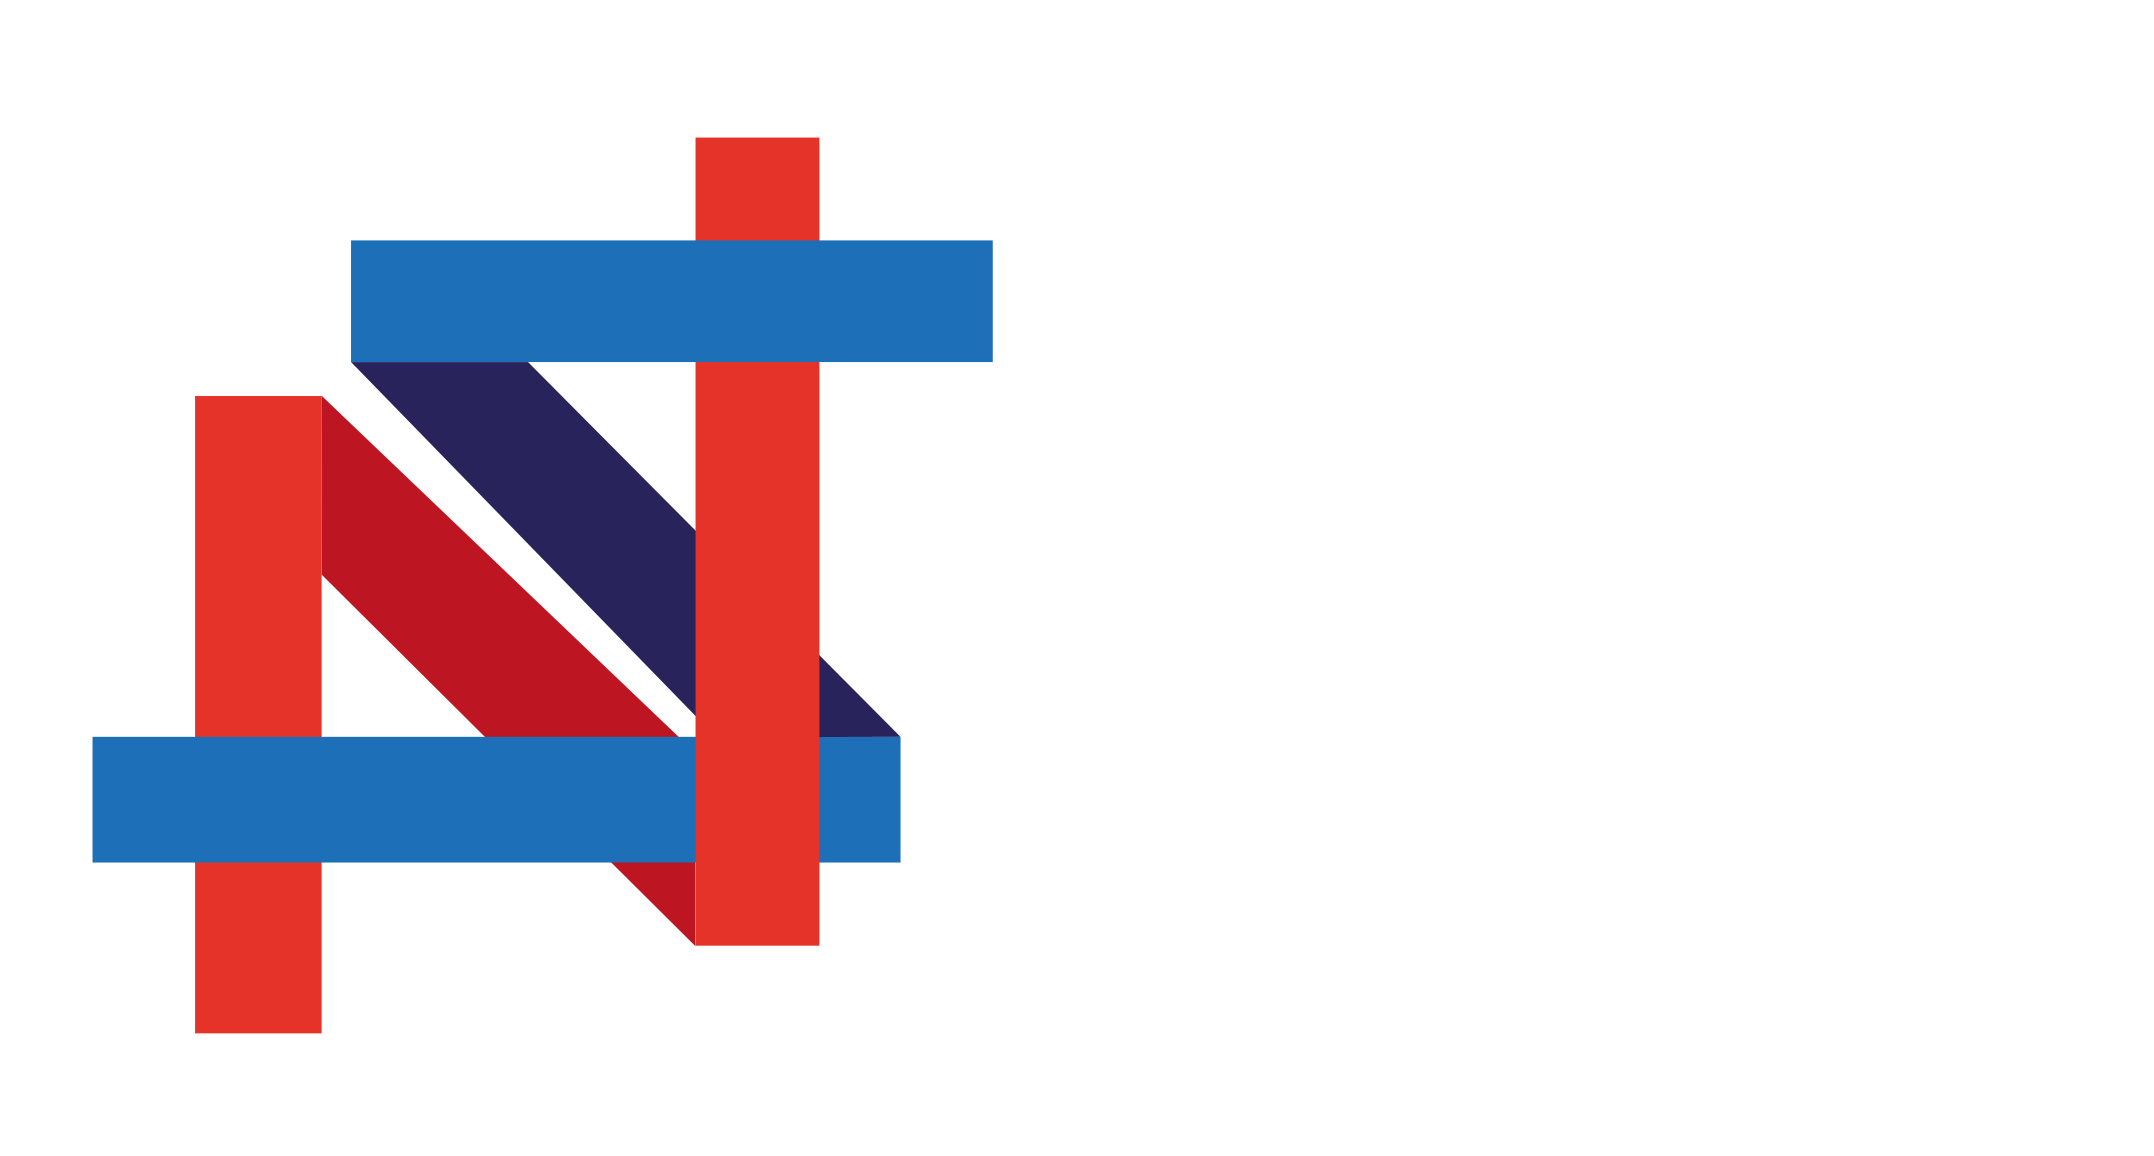 SecSI - Security Solutions for Innovation